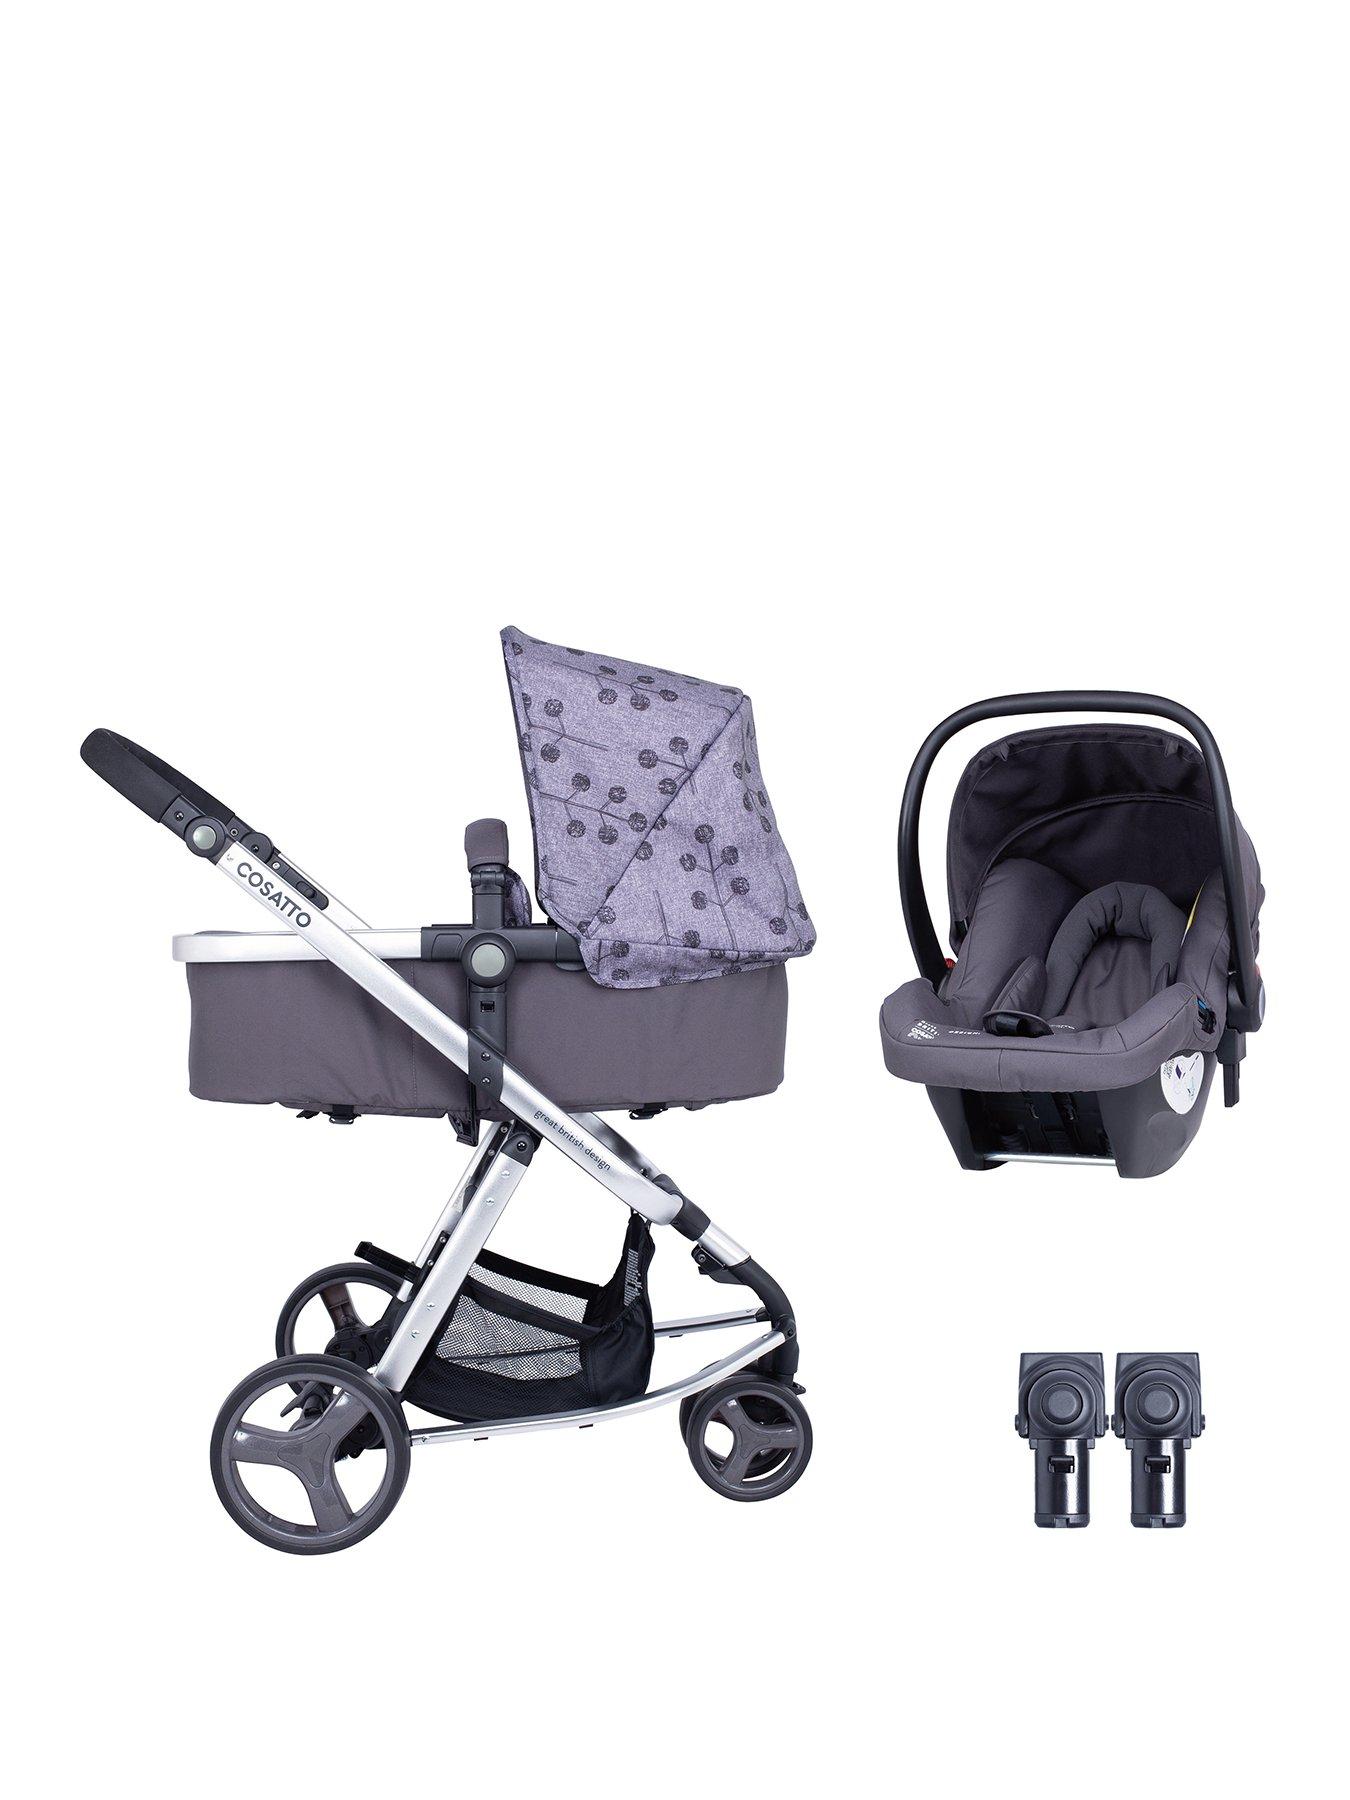 2 in 1 pram and carseat